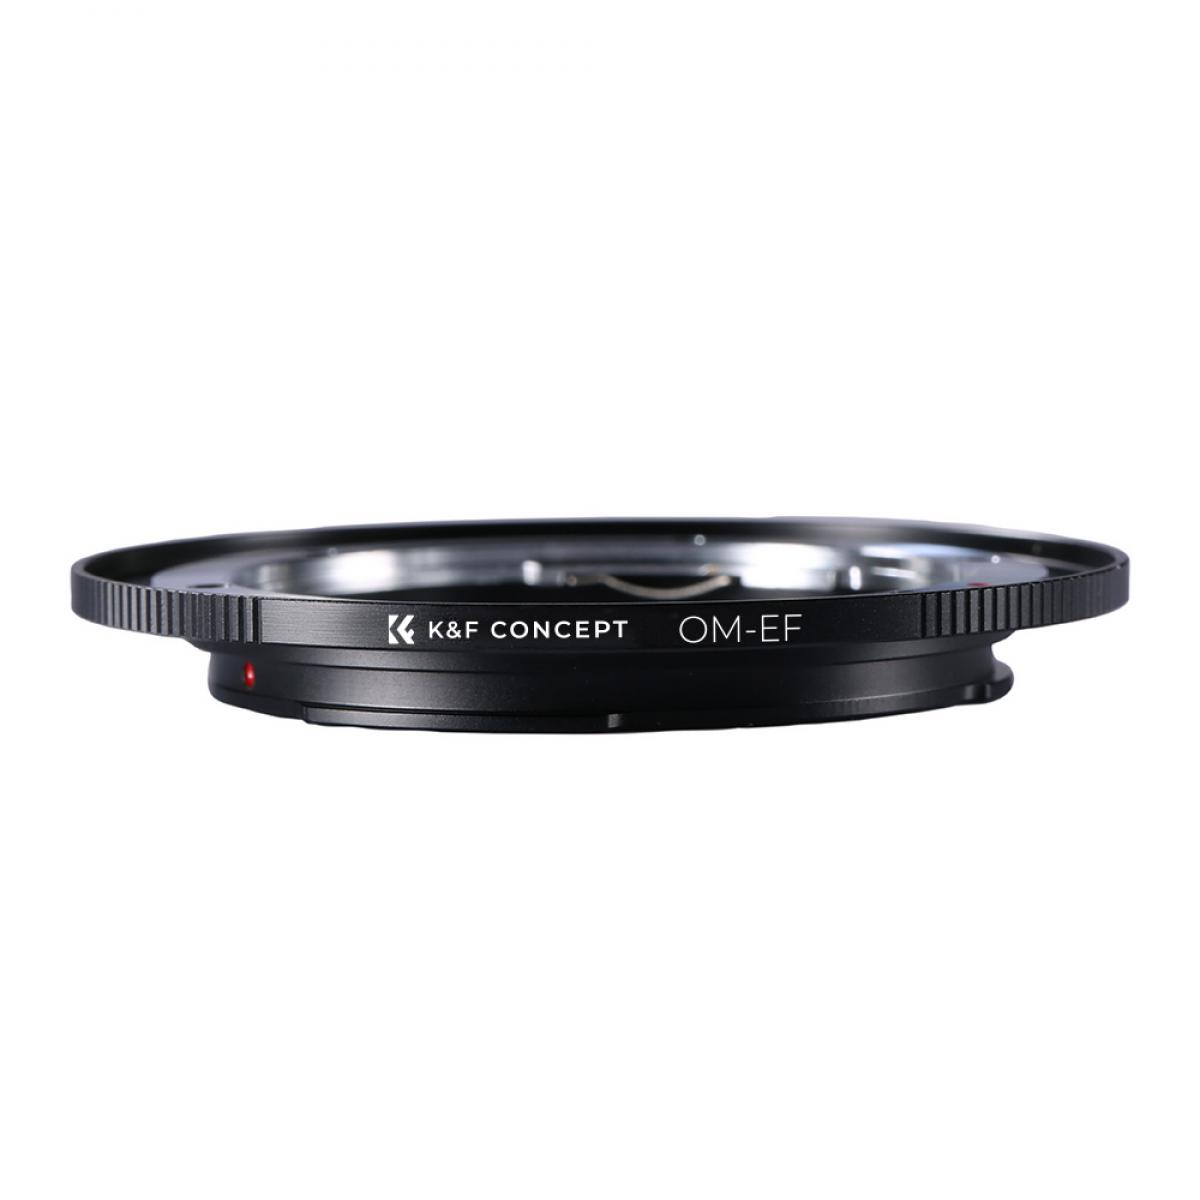 Olympus OM Lenses to Canon EF Lens Mount Adapter K&F Concept M16131 Lens Adapter